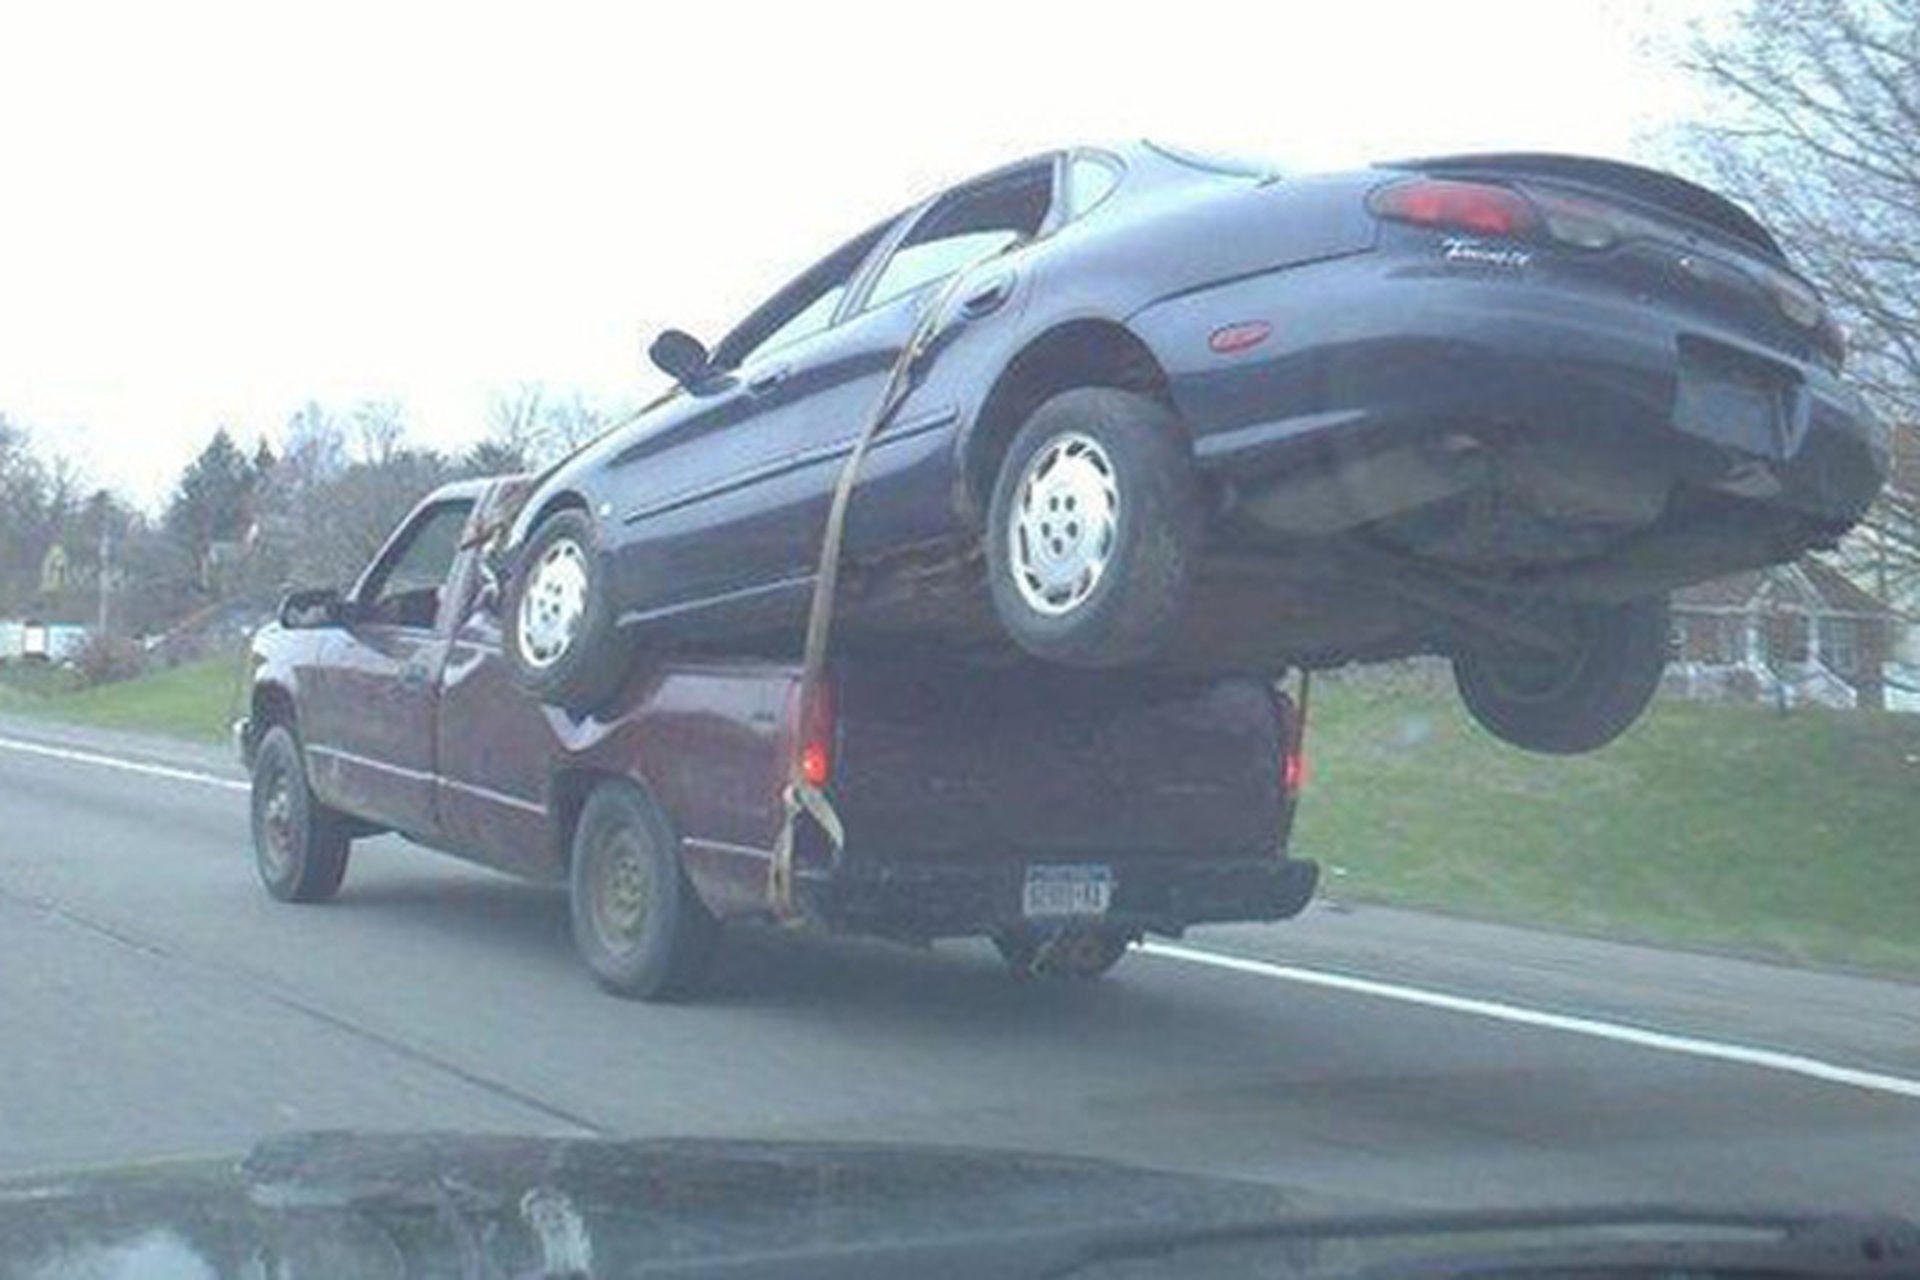 8-examples-of-how-not-to-tow-a-vehicle.jpg